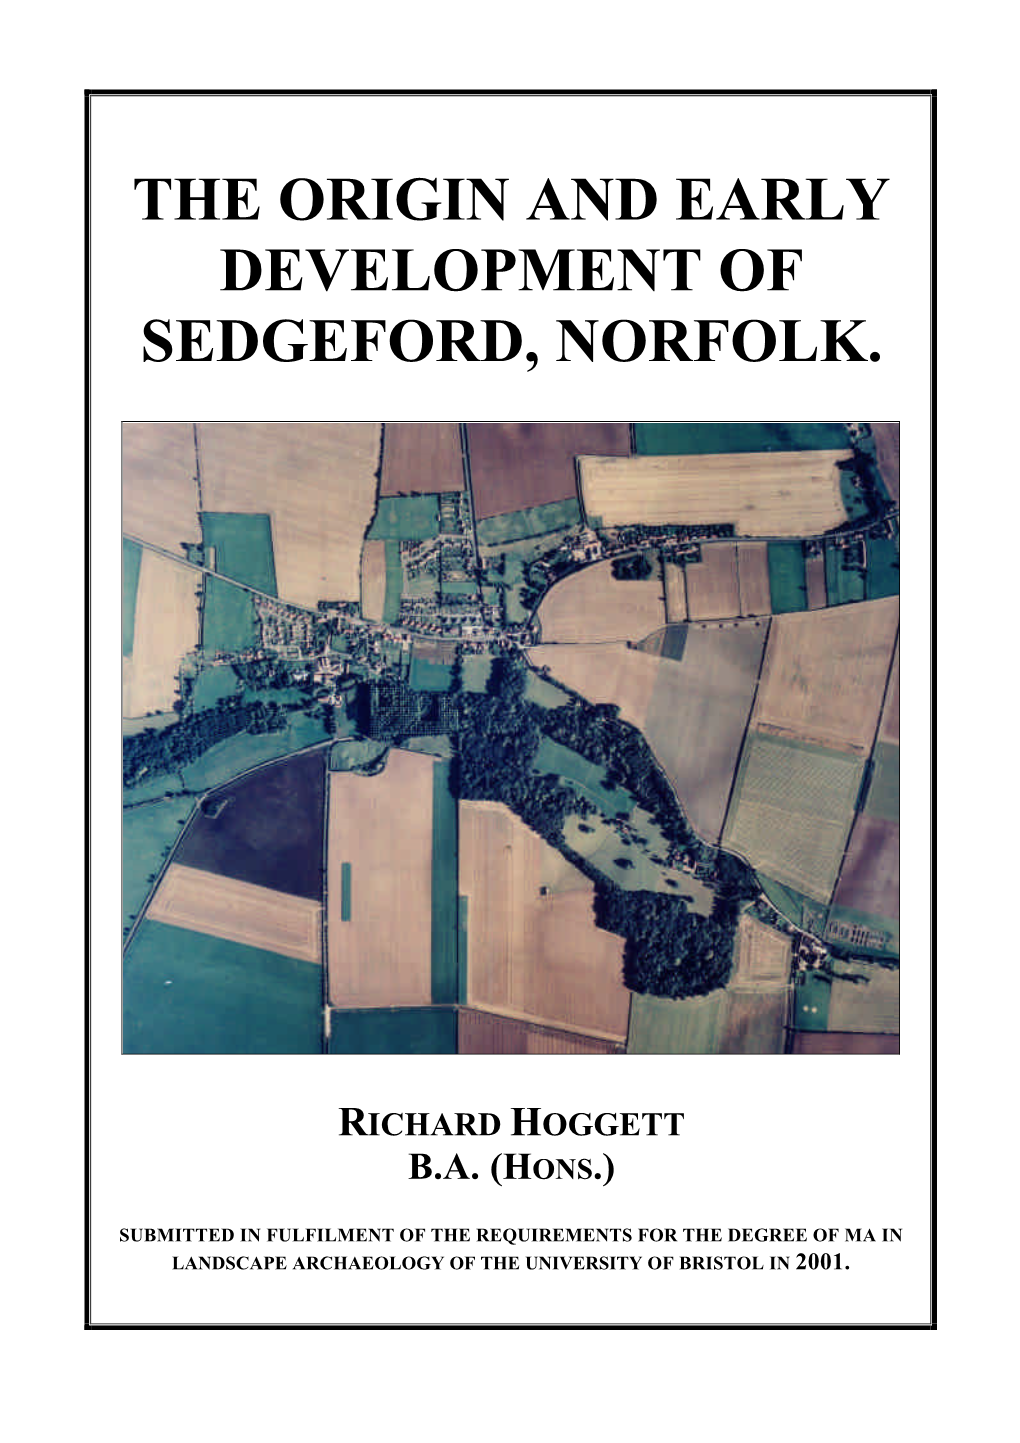 The Origin and Early Development of Sedgeford, Norfolk